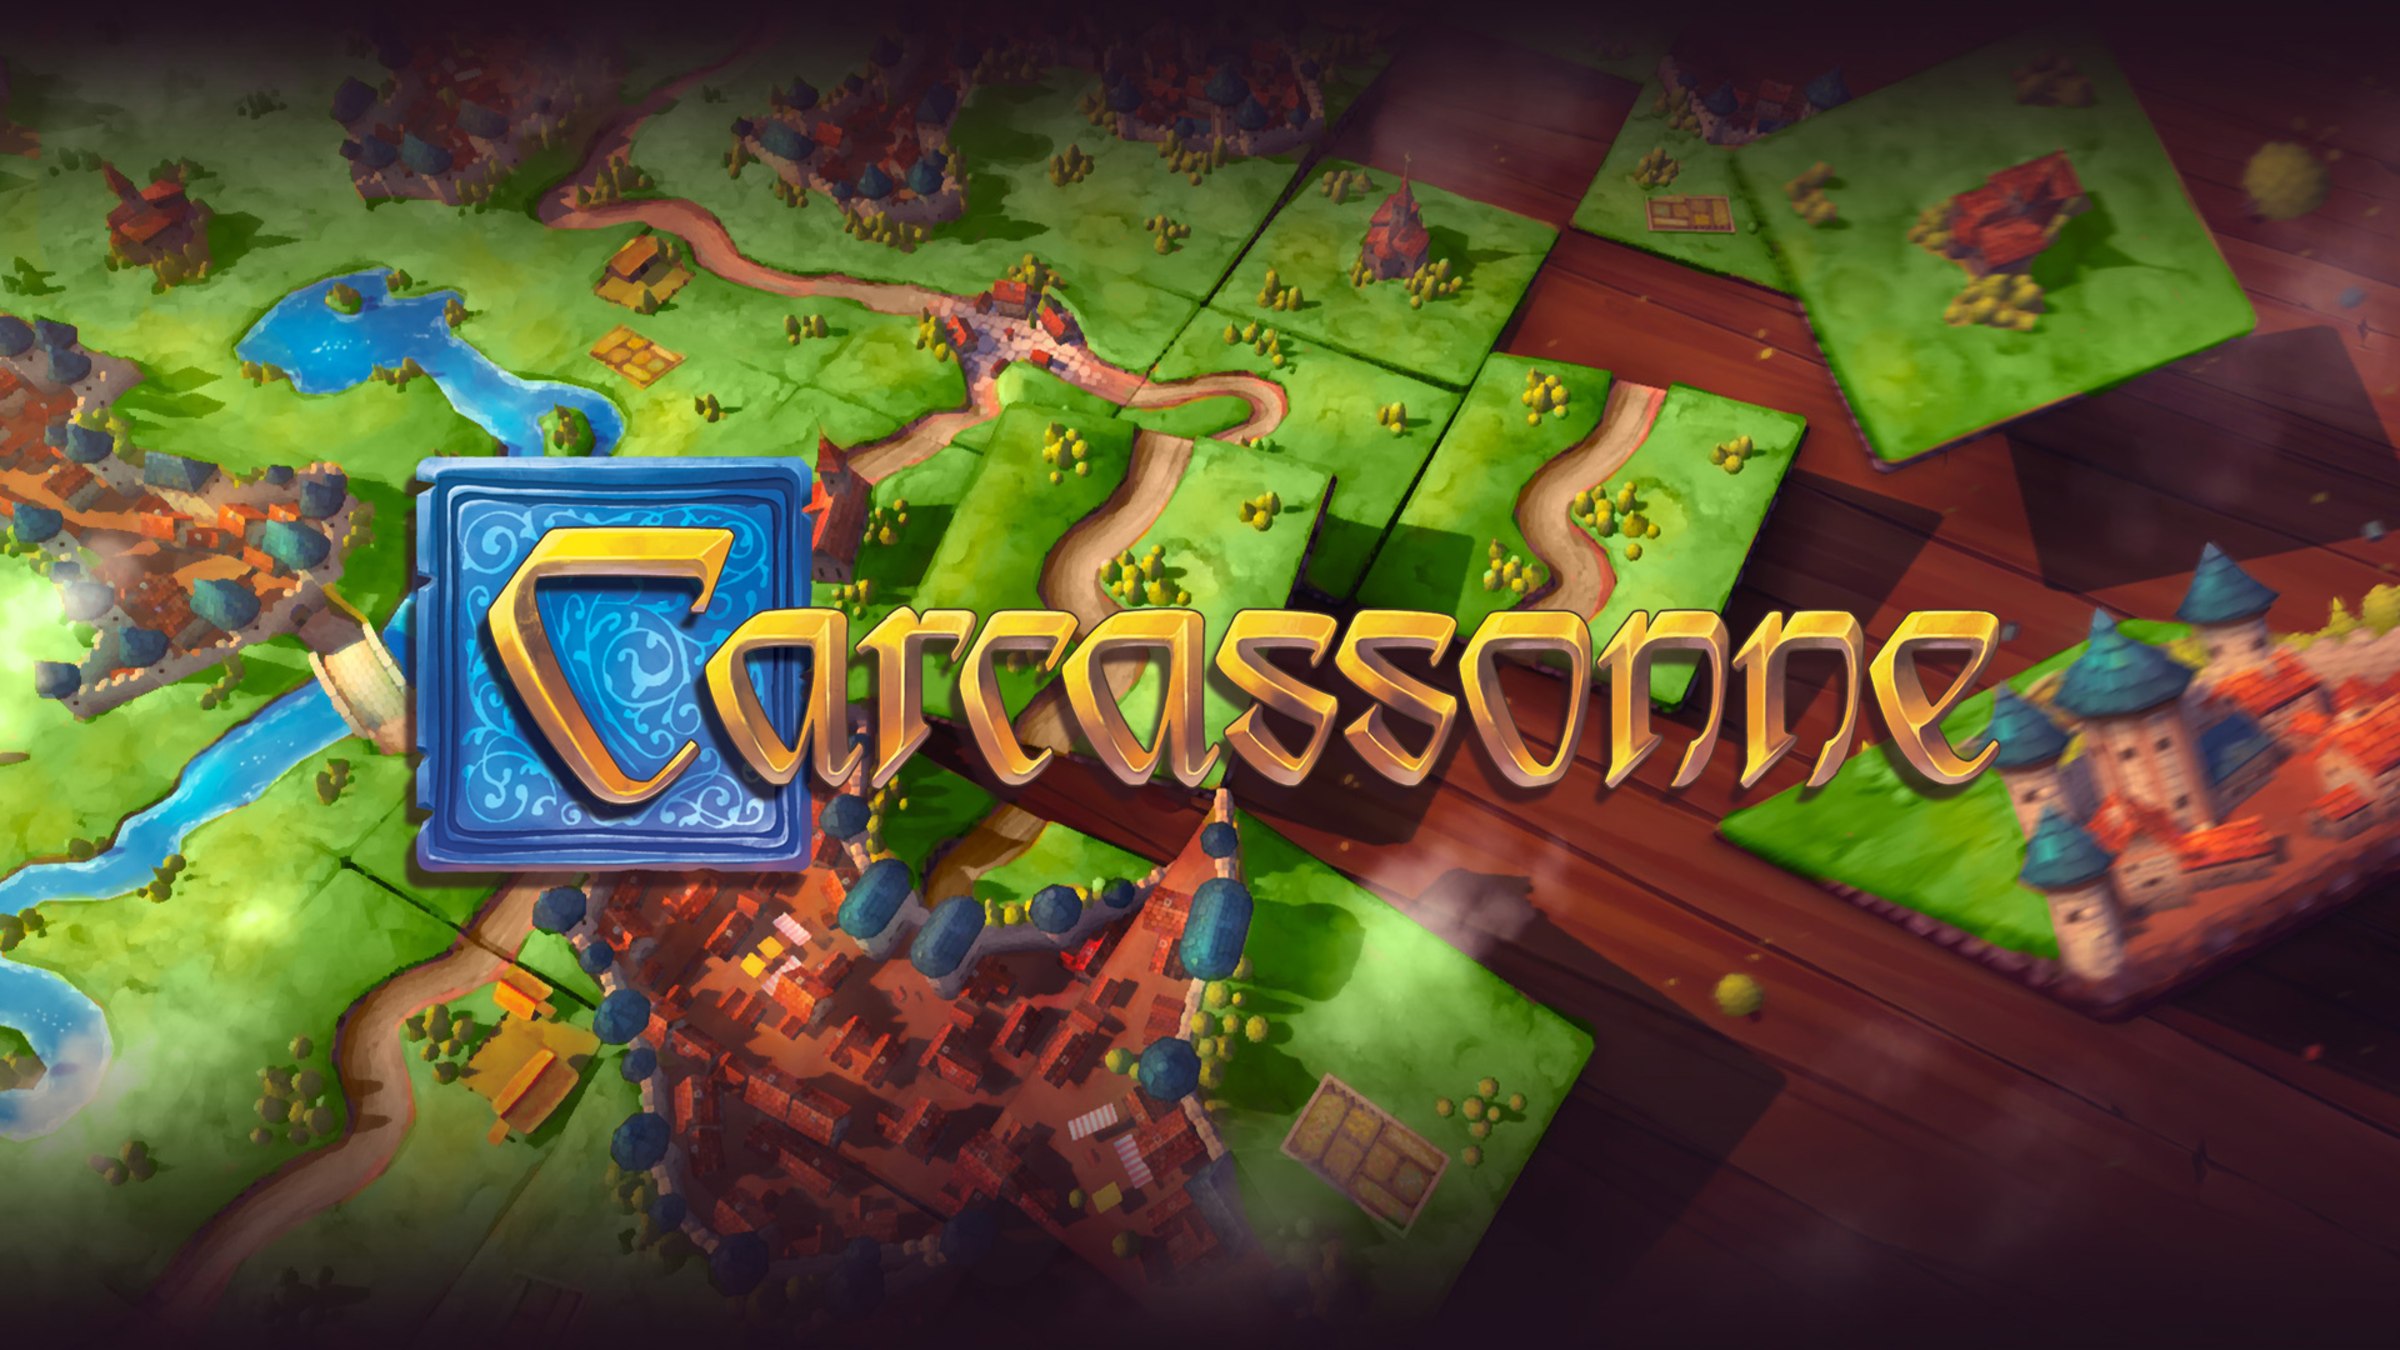 Carcassonne for Nintendo Switch - Nintendo Official Site